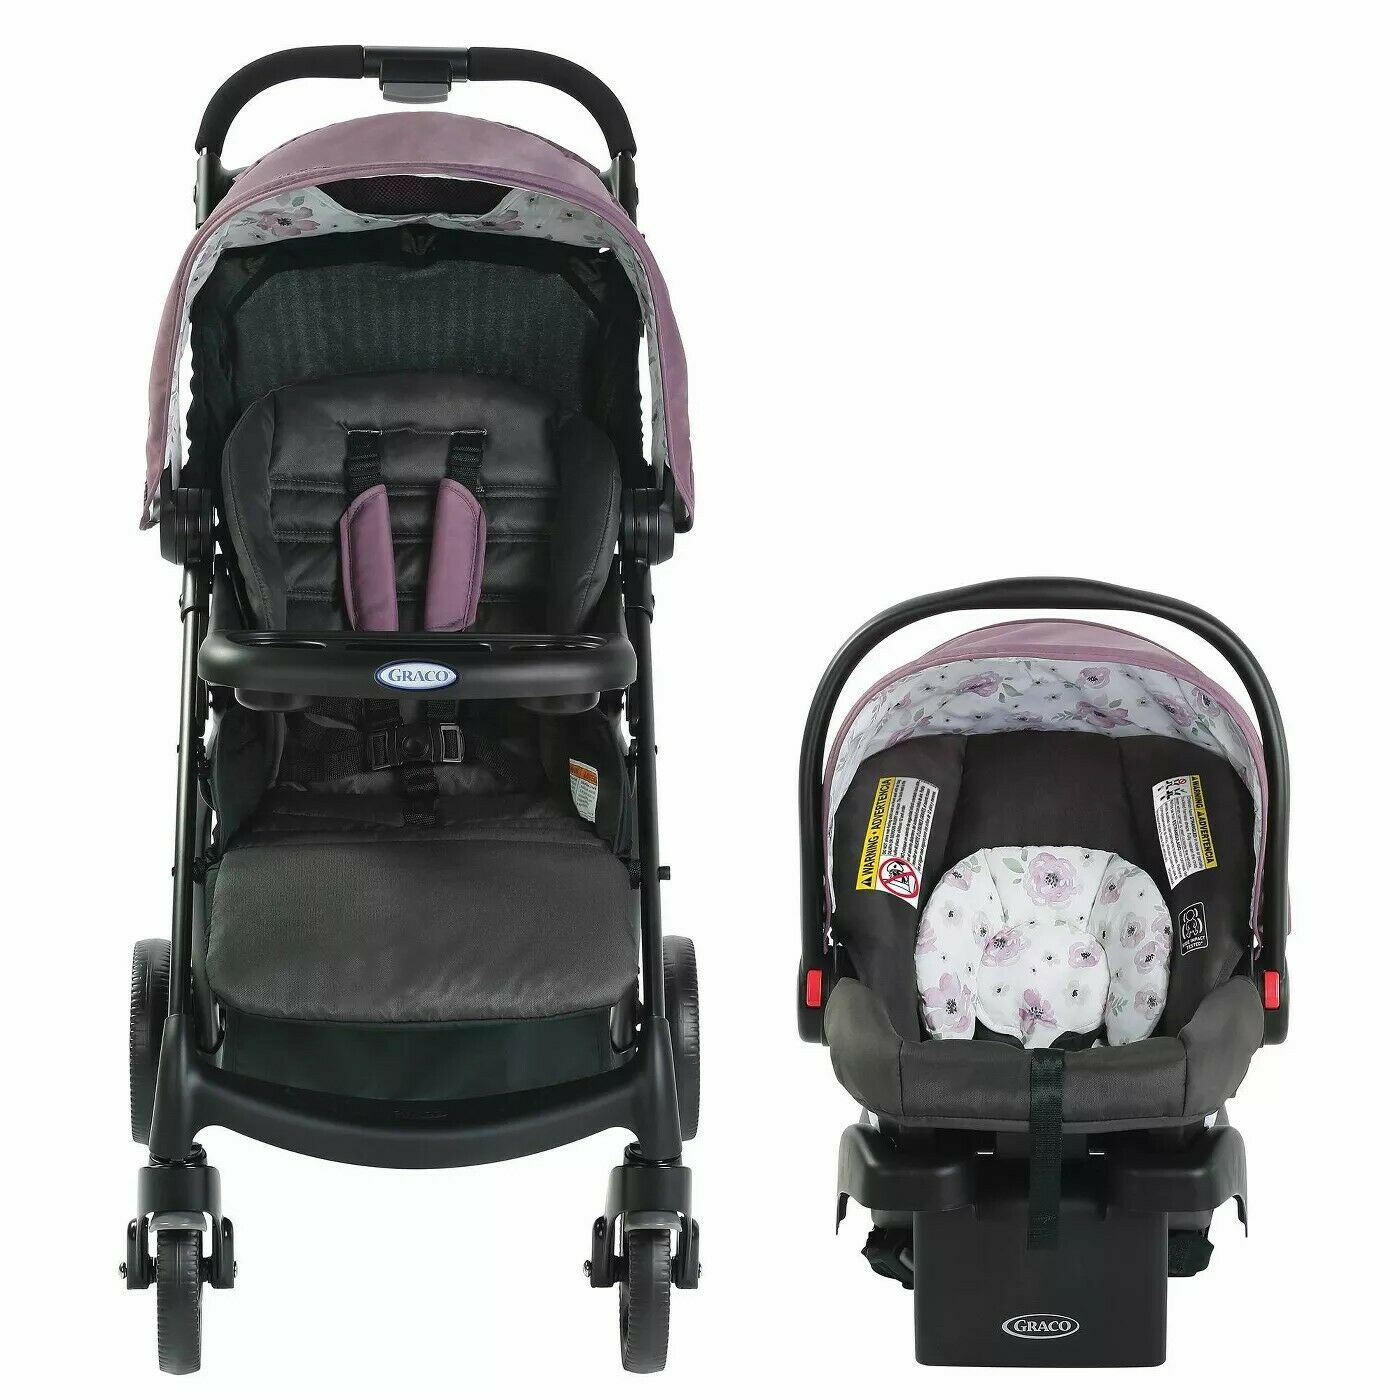 Newborn Baby Stroller Travel System with Infant Car Seat Playard Crib Combo